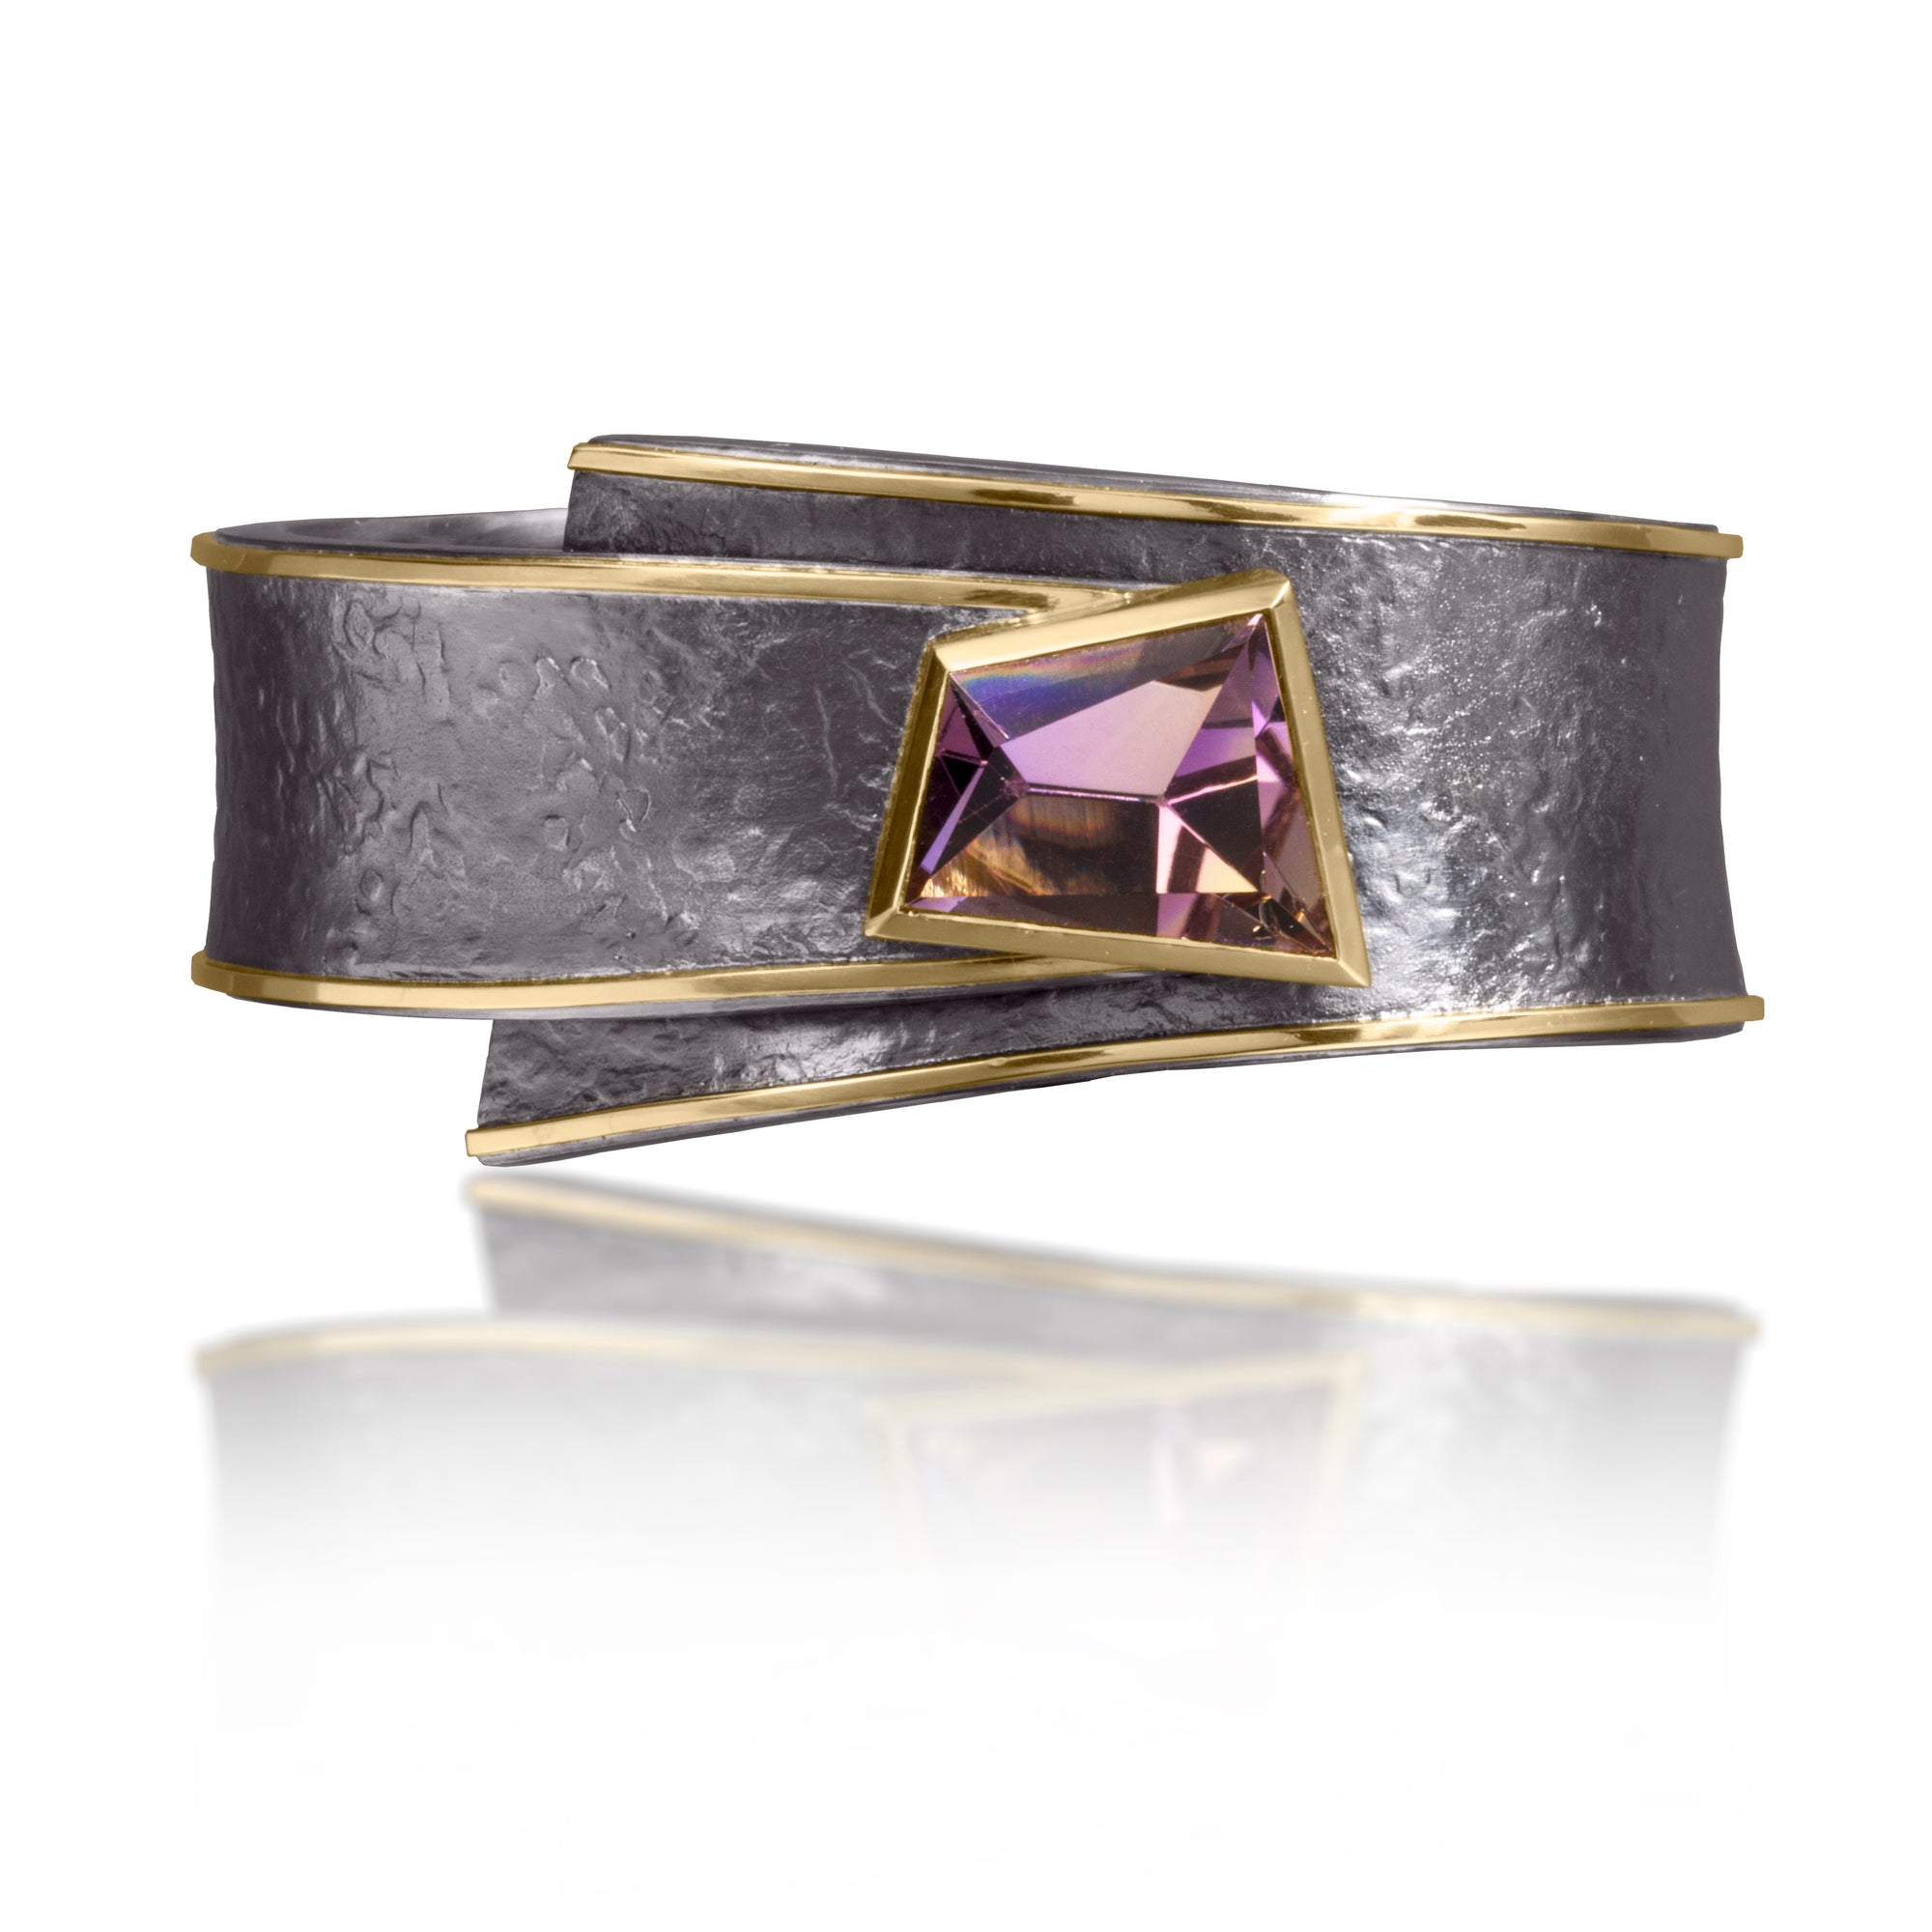 This one-of-a-kind Cyclone Cuff in 18k gold and oxidized silver is bezel set with an unusual, mirror-cut Ametrine. A hinge on the back side of this tapered cuff allows it to fully open, making it incredibly easy to put on and off with one hand. Wide, wrap-around style cuff, hand fabricated, spring steel hinge, hammer textured.